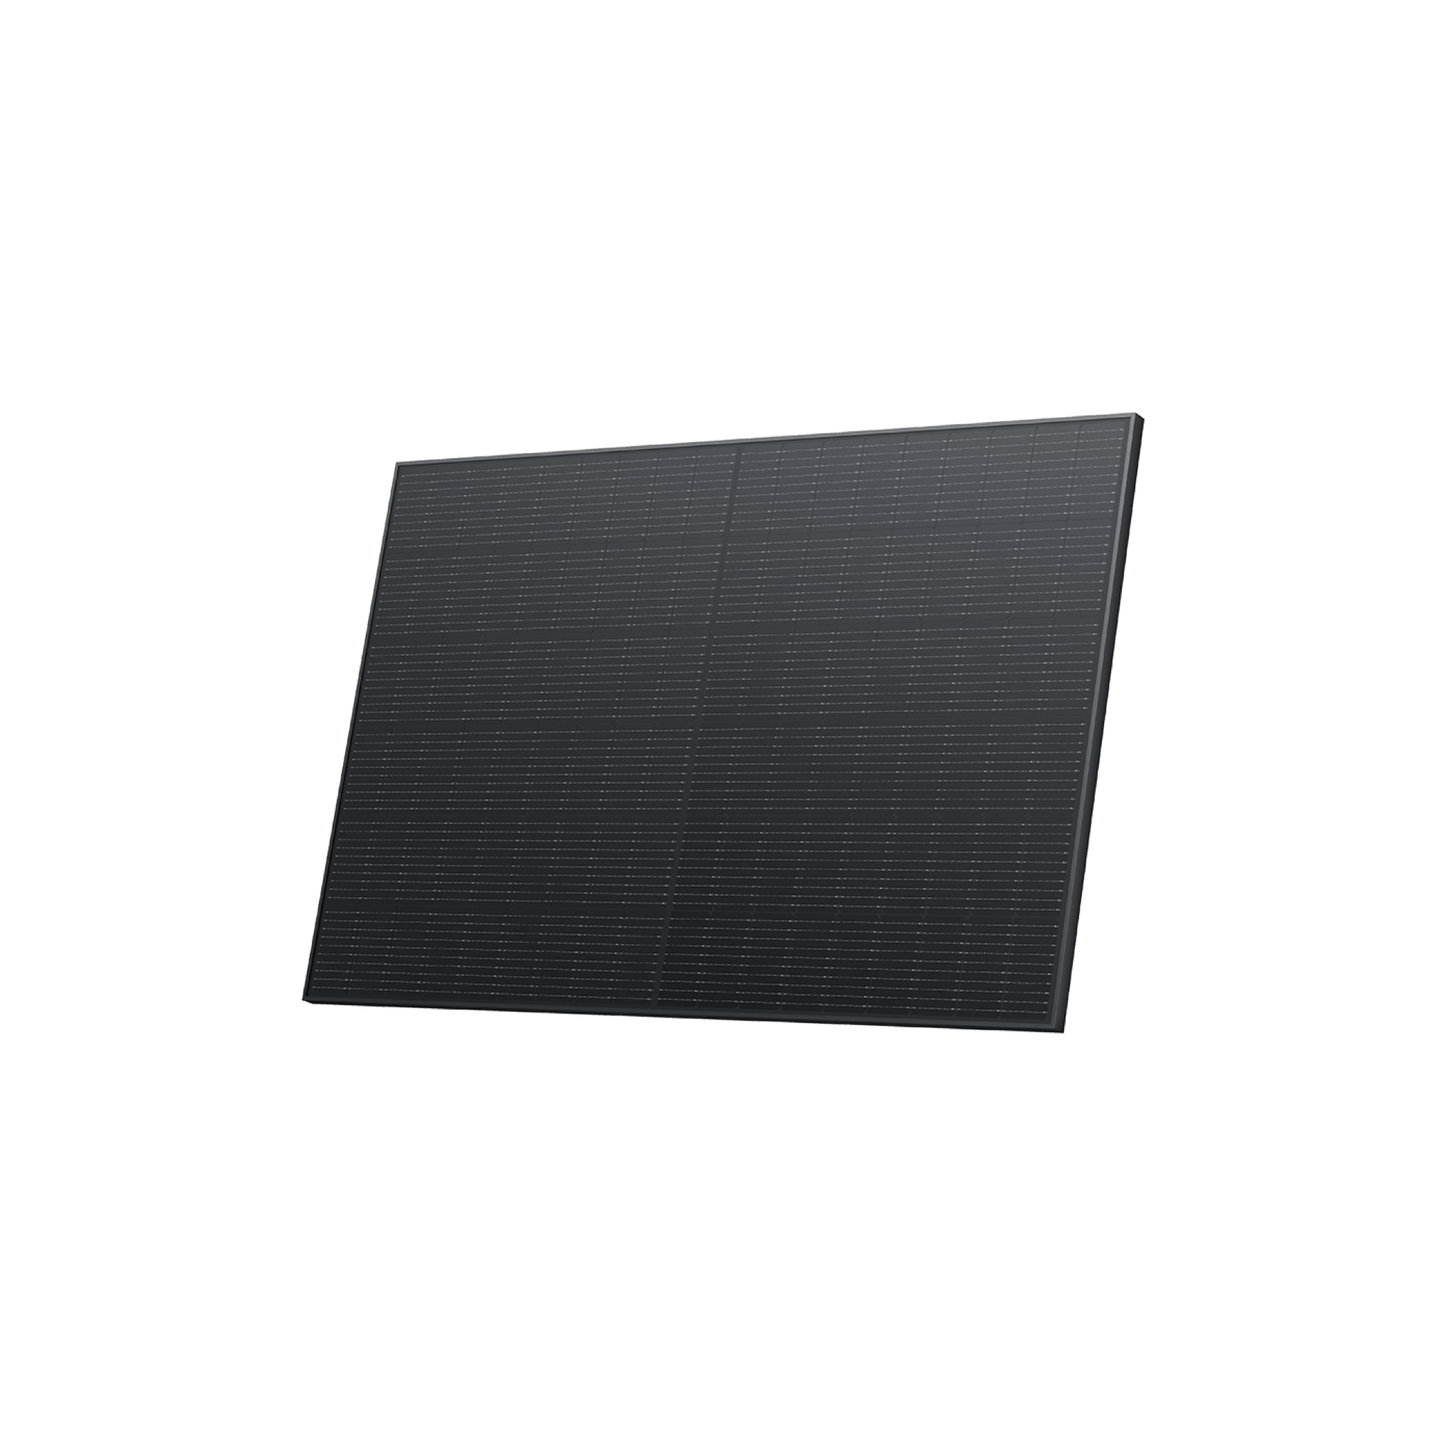 EcoFlow 400W Rigid Solar Panel 2pcs - Waterproof Durable For Home Use and Off-Grid